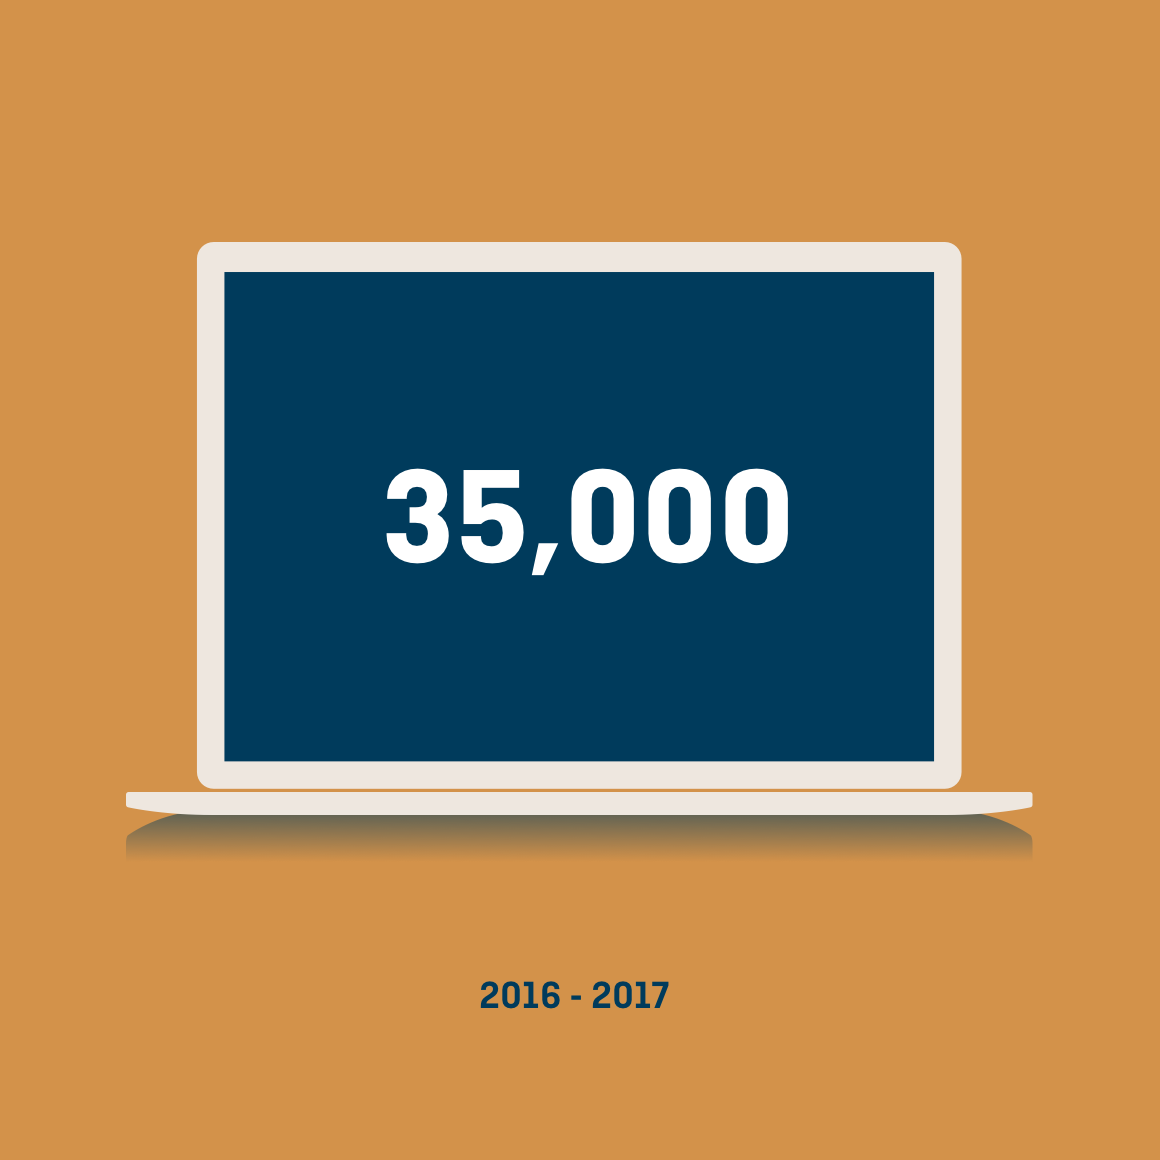 Graphic of open laptop displaying 35,000 conversions from 2026-2017